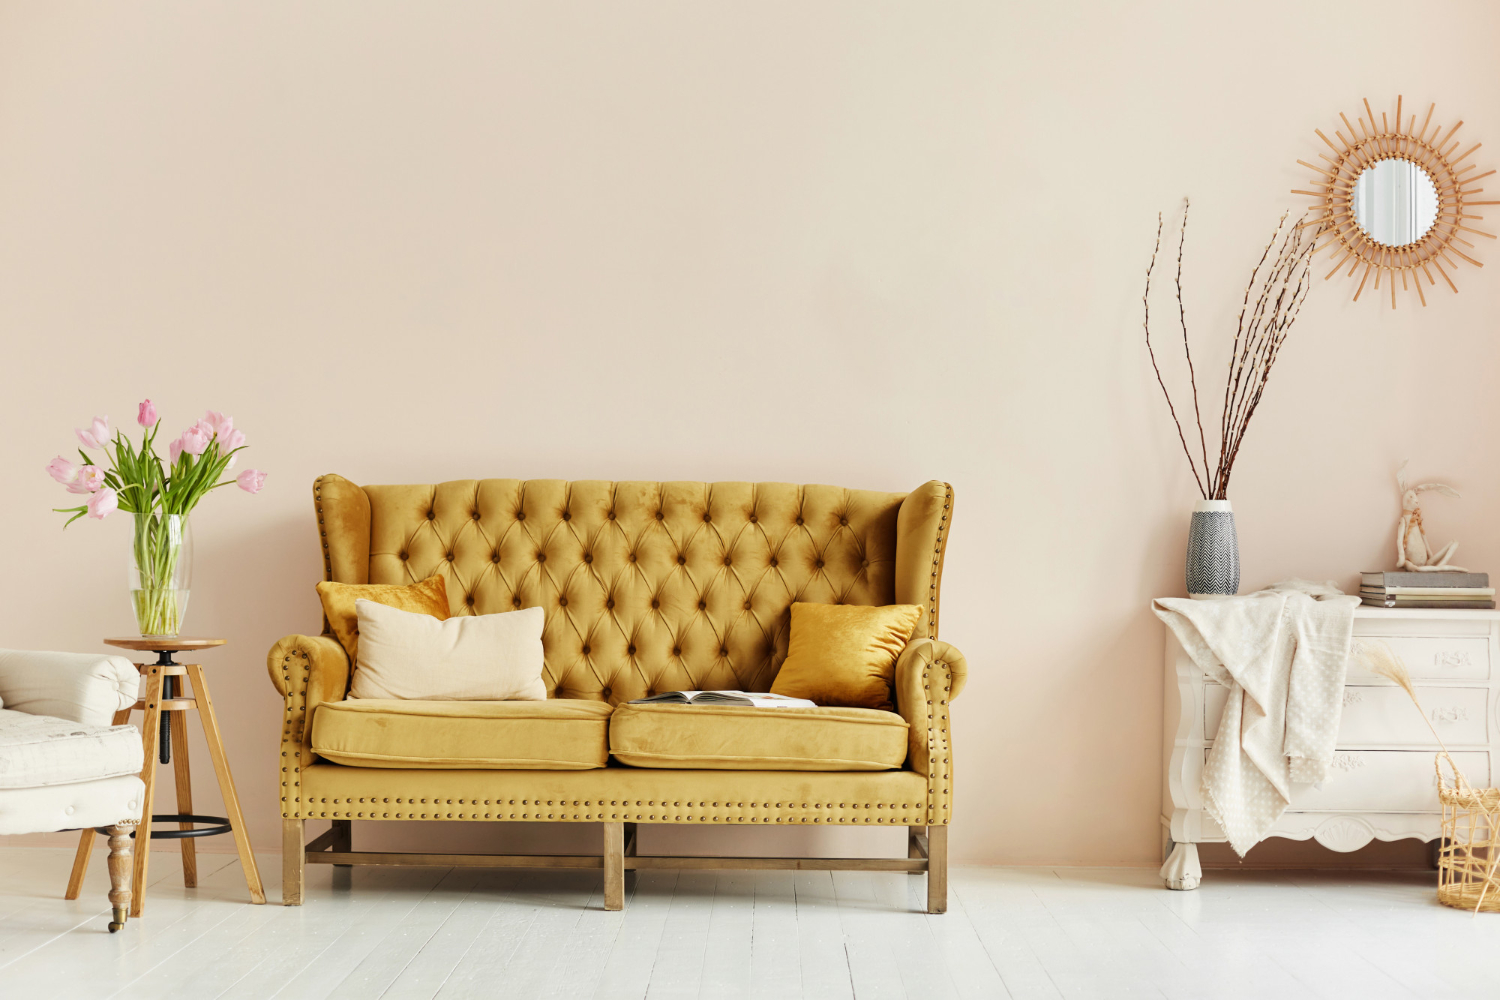 Chesterfield style sofa – which interiors does it suit?